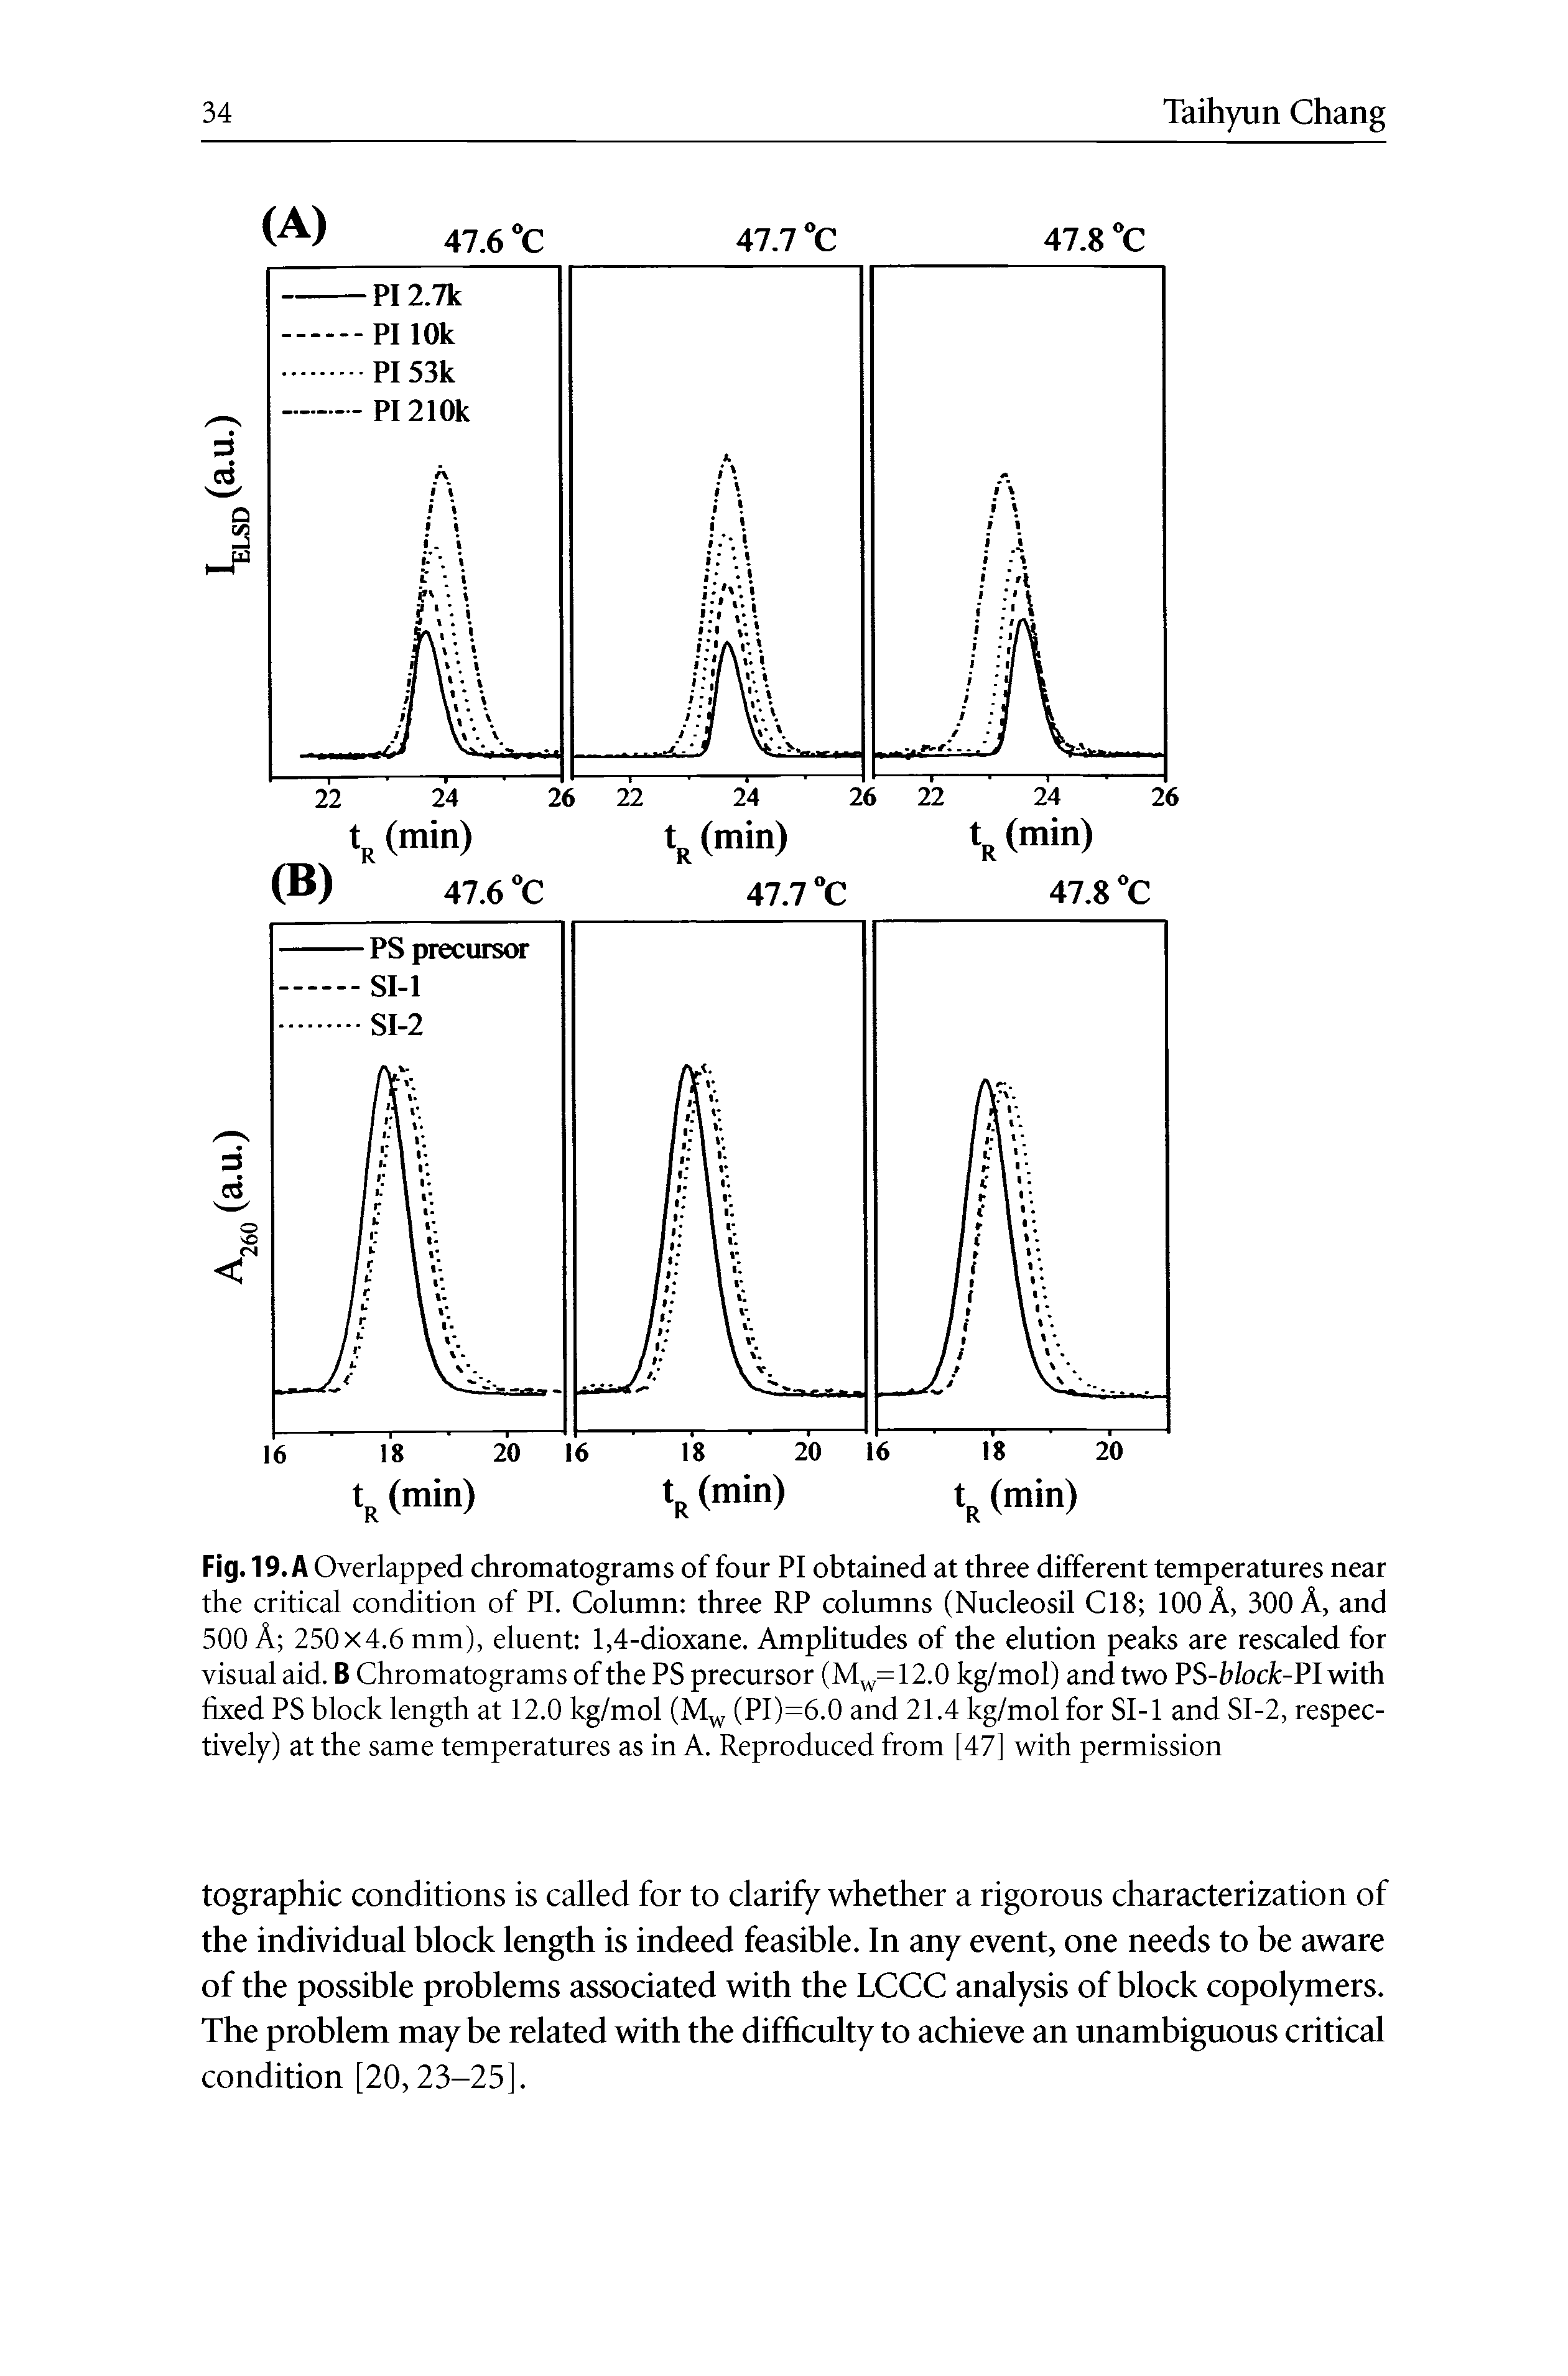 Fig. 19. A Overlapped chromatograms of four PI obtained at three different temperatures near the critical condition of PI. Column three RP columns (Nucleosil C18 100 A, 300 A, and 500 A 250x4.6 mm), eluent 1,4-dioxane. Amplitudes of the elution peaks are rescaled for visual aid. B Chromatograms of the PS precursor (M =12.0 kg/mol) and two PS-I /ocfc-PI with fixed PS block length at 12.0 kg/mol (M (PI)=6.0 and 21.4 kg/mol for SI-1 and SI-2, respectively) at the same temperatures as in A. Reproduced from [47] with permission...